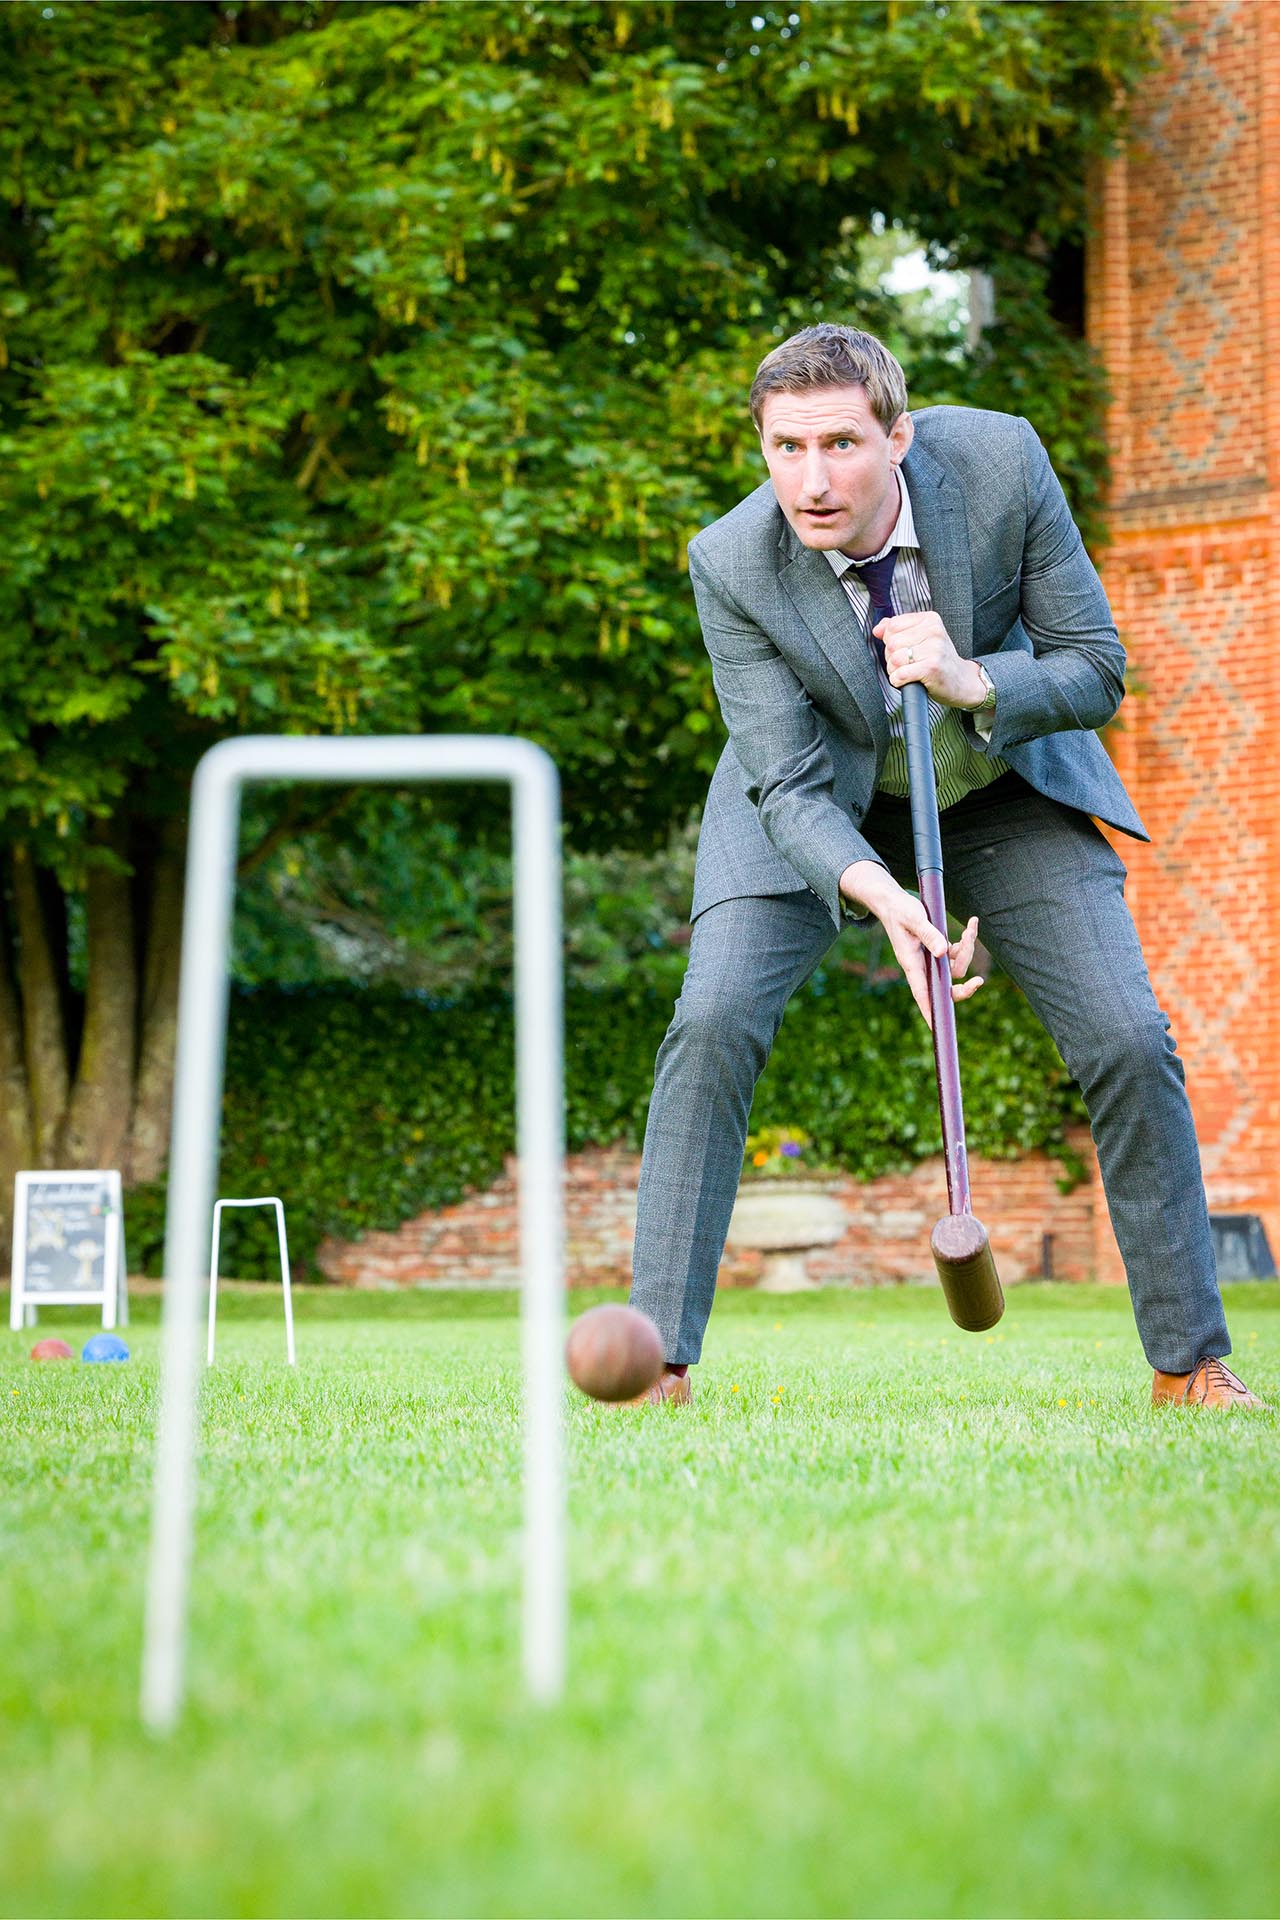 Wedding guest playing croquet at a Leez Priory wedding, Great Leighs, Chelmsford, Essex